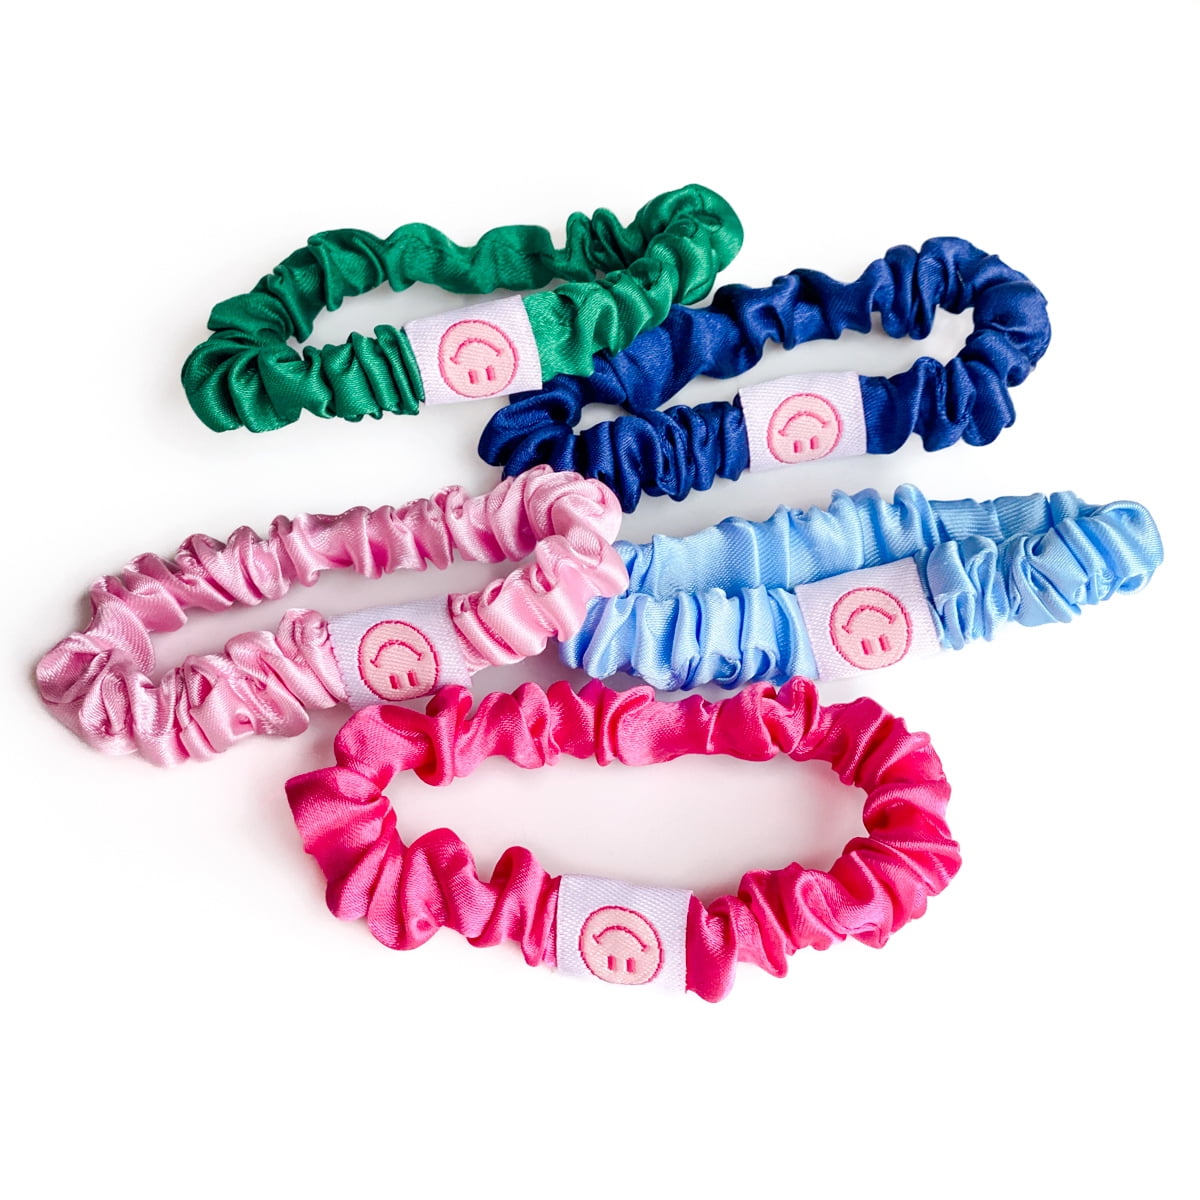 Packed Party Smiles For Miles Sleep Scrunchie Set, Multi-Color Set of Elastic Silk Scrunchies, Ponytail Holder, 5 CT.